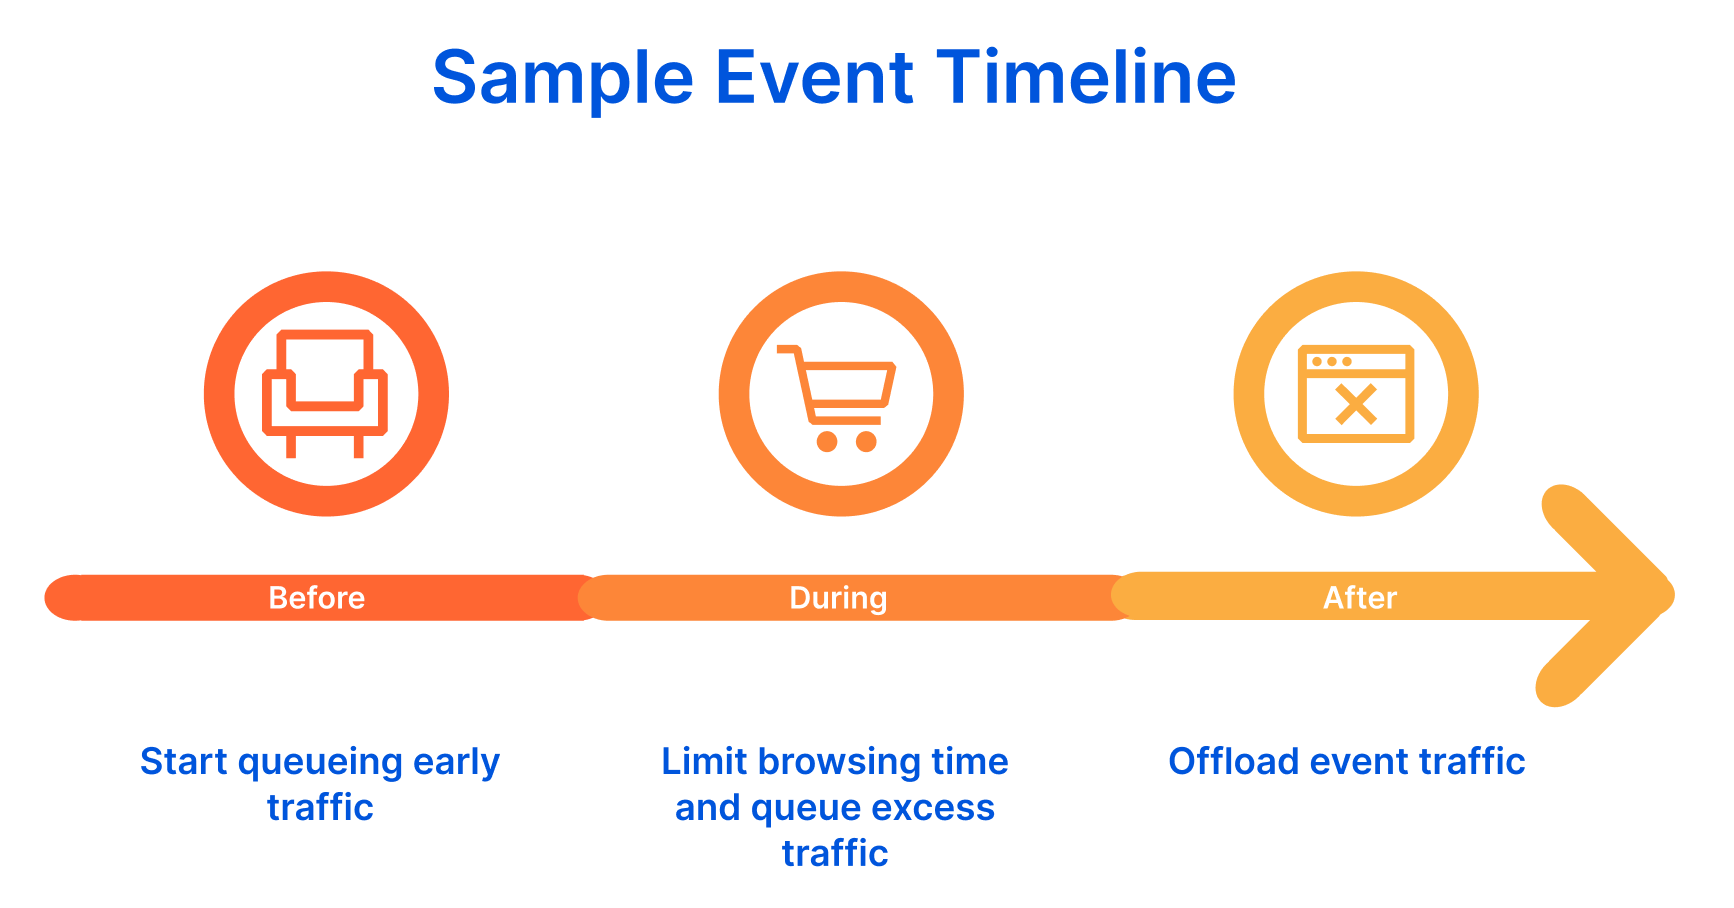 Waiting Room Event Scheduling protects your site during online events